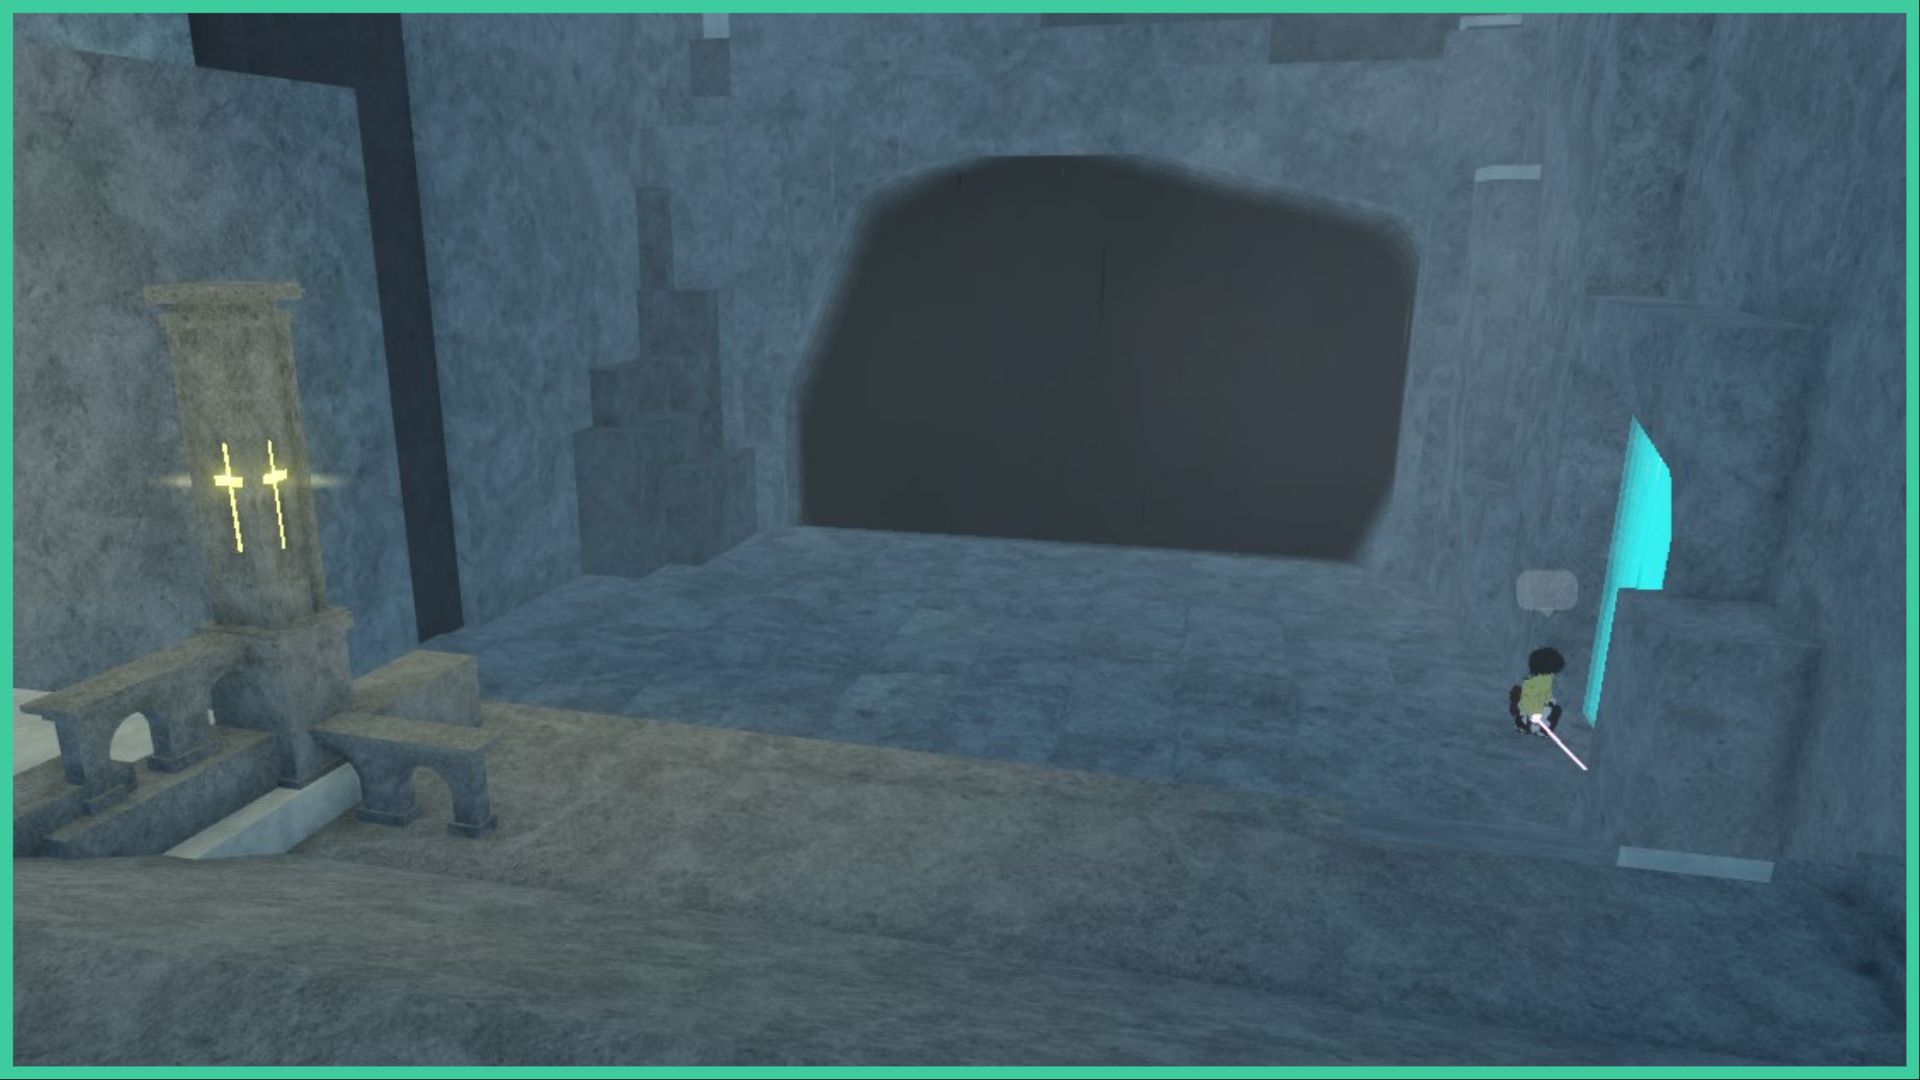 feature image for our type soul theatre guide, the image is a screenshot of a cave in wandenreich that leads into darkness, with a stone pillar to the left of the slope with a glowing cross in the middle, the slope leads to the cave entrance, as a glowing blue portal appears on the right wall